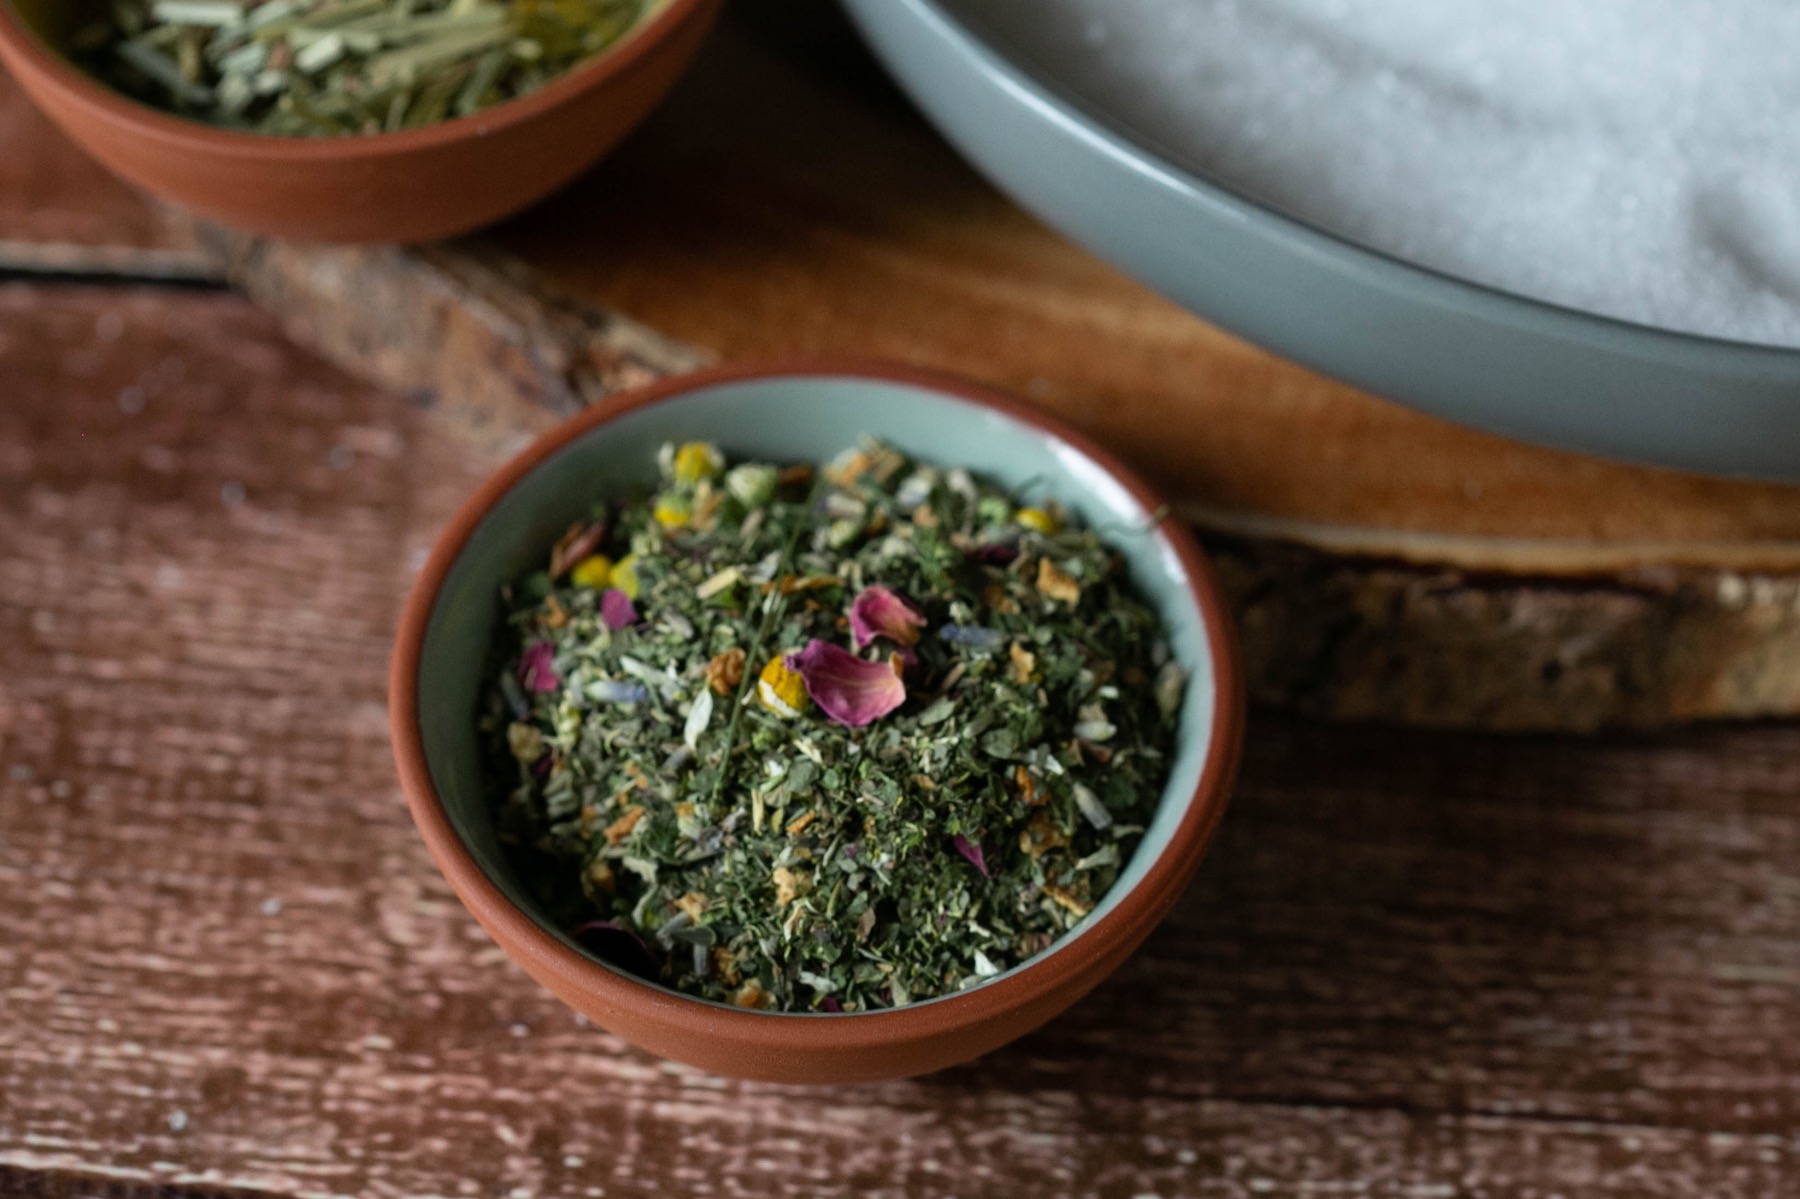 herbs and flowers to add to to diy herbal bath soaks